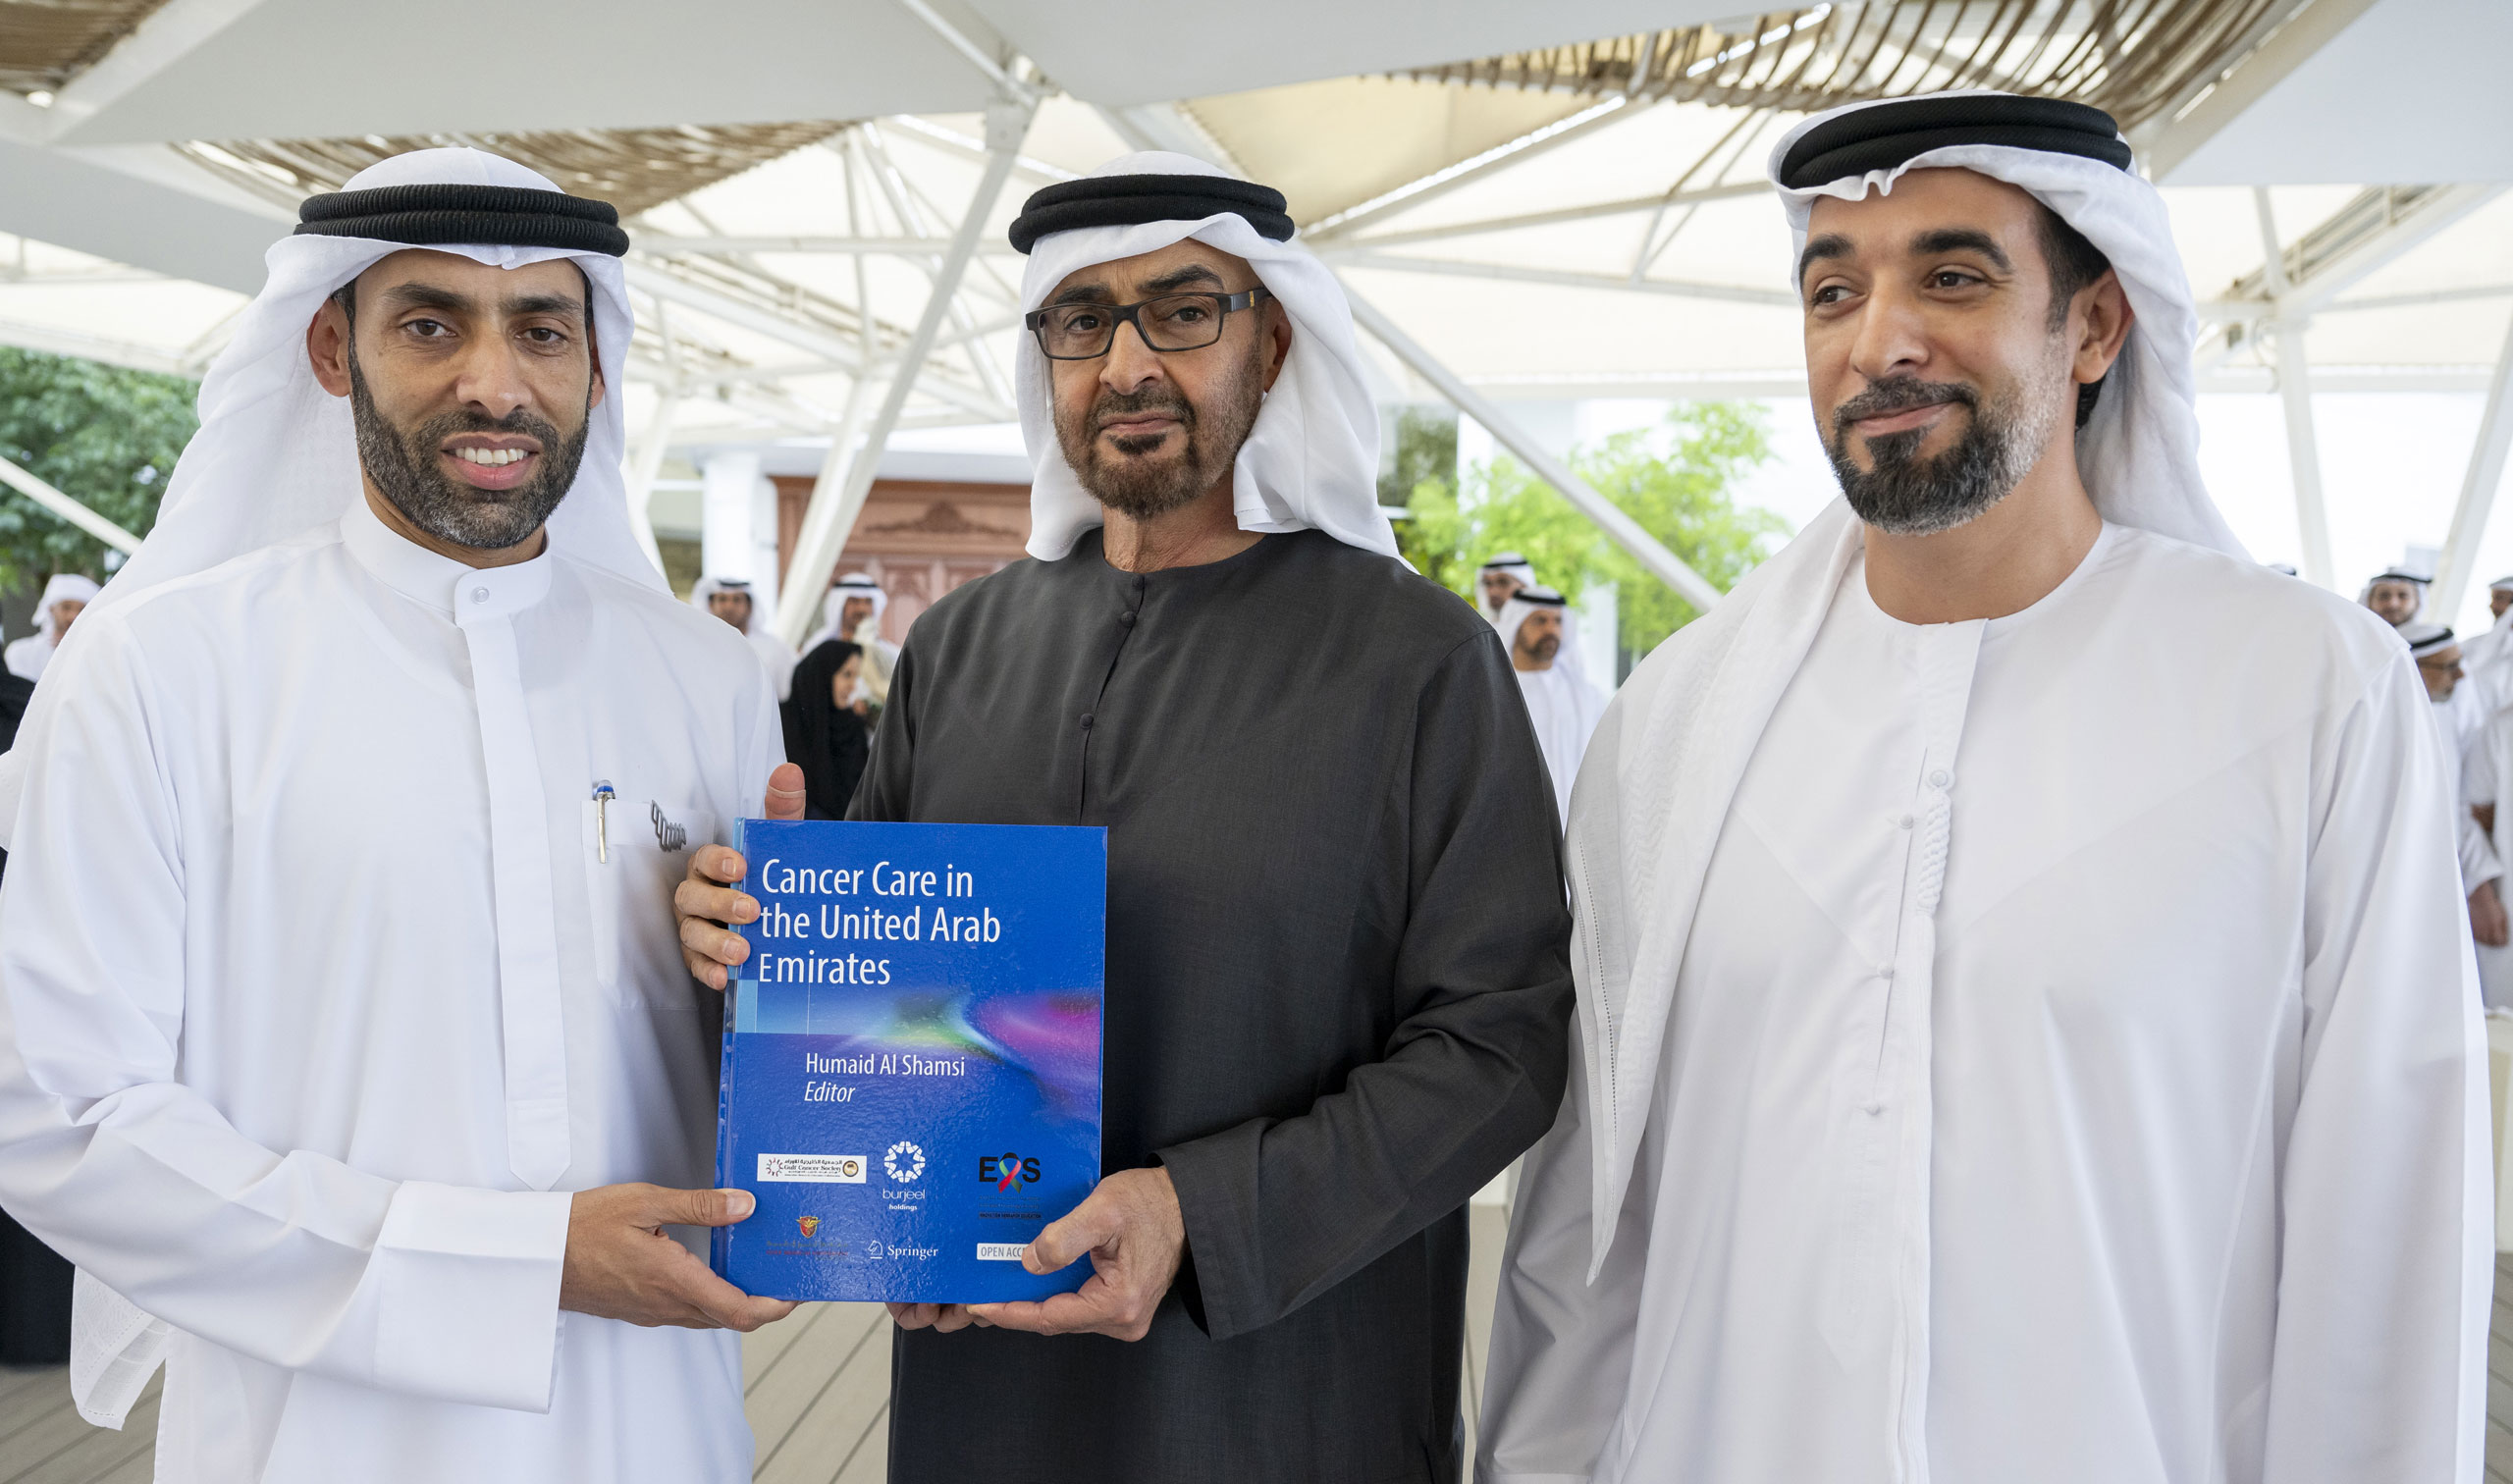 His Highness Sheikh Mohamed bin Zayed Al Nahyan Receives First Copy of ‘Cancer Care in the United Arab Emirates’